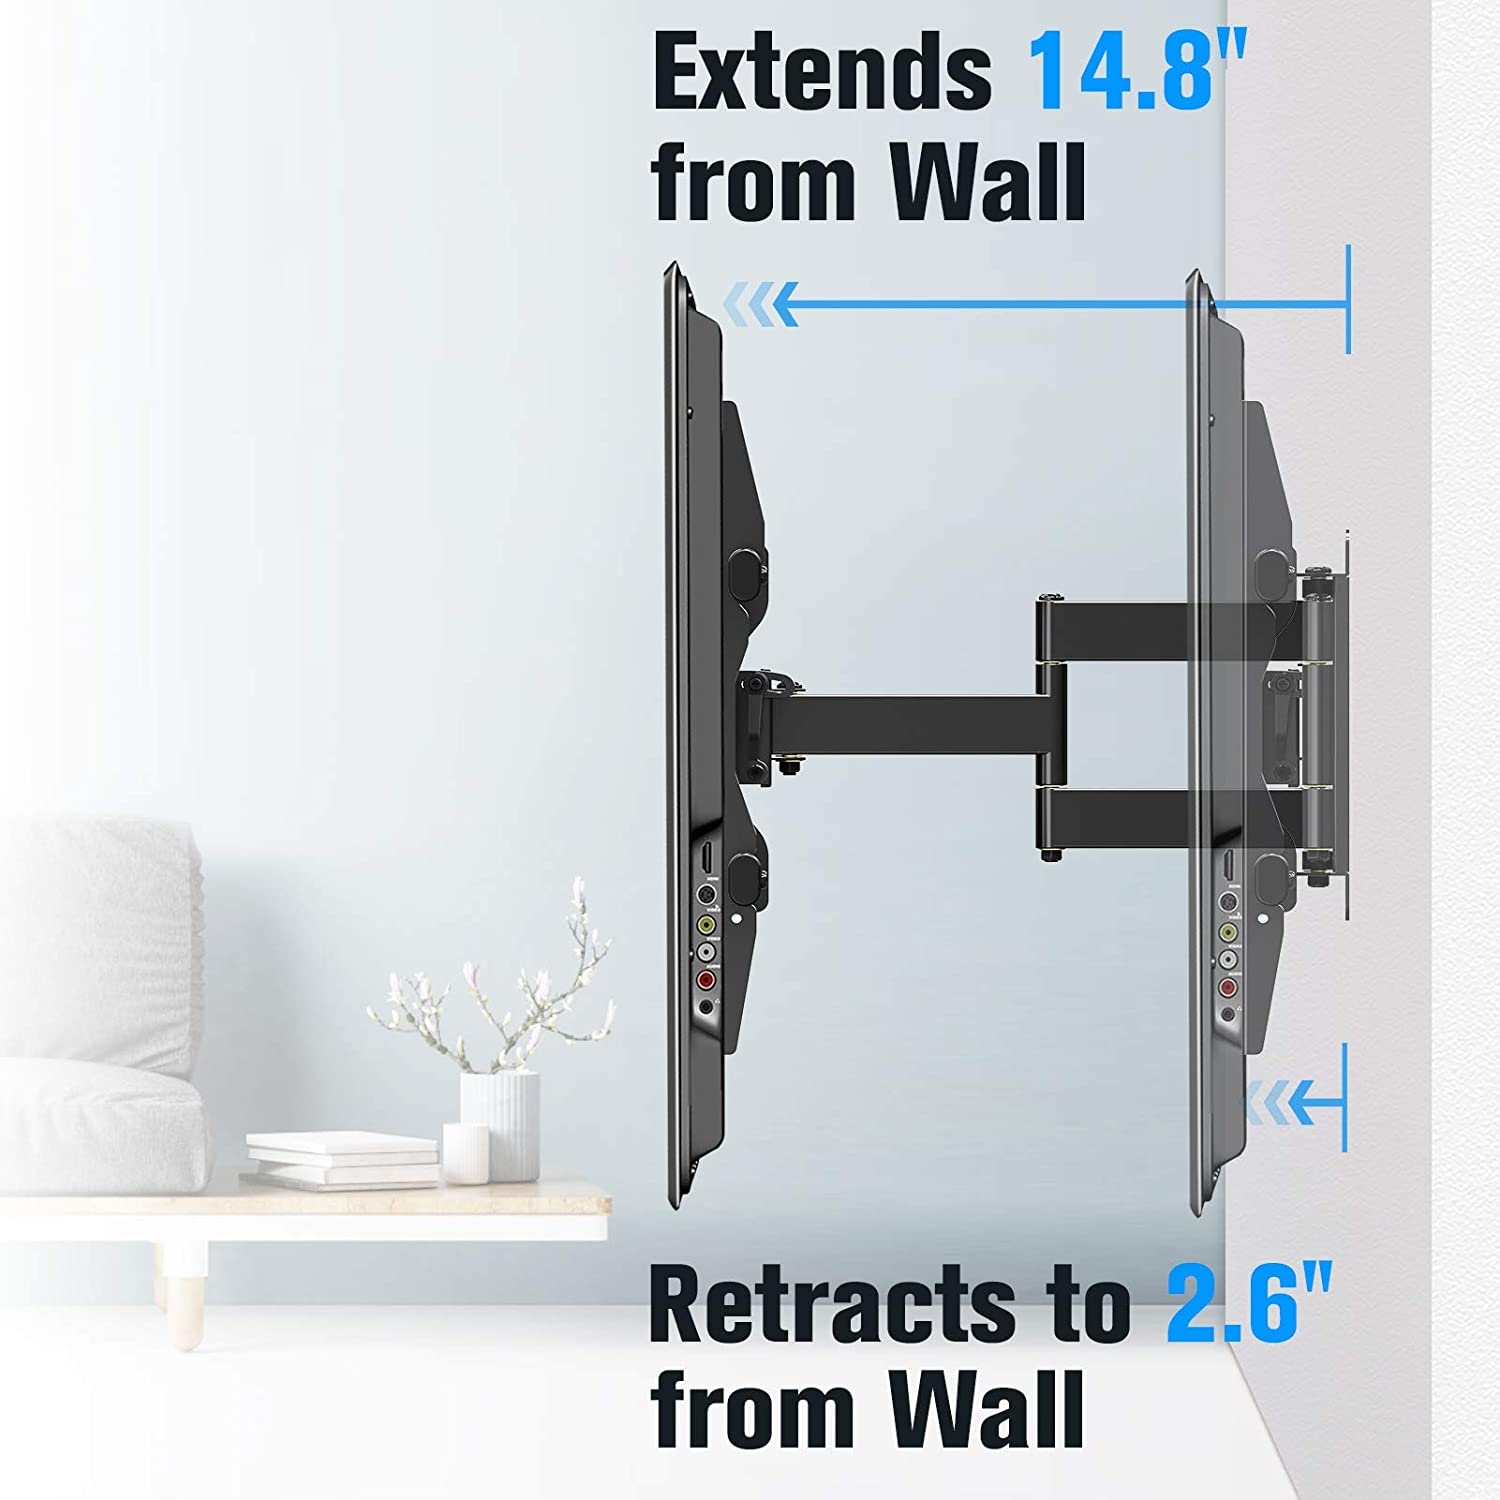 retracts the TV 2.6'' back to the wall to save space and extends 14.8'' fromthe wall to fully adjust